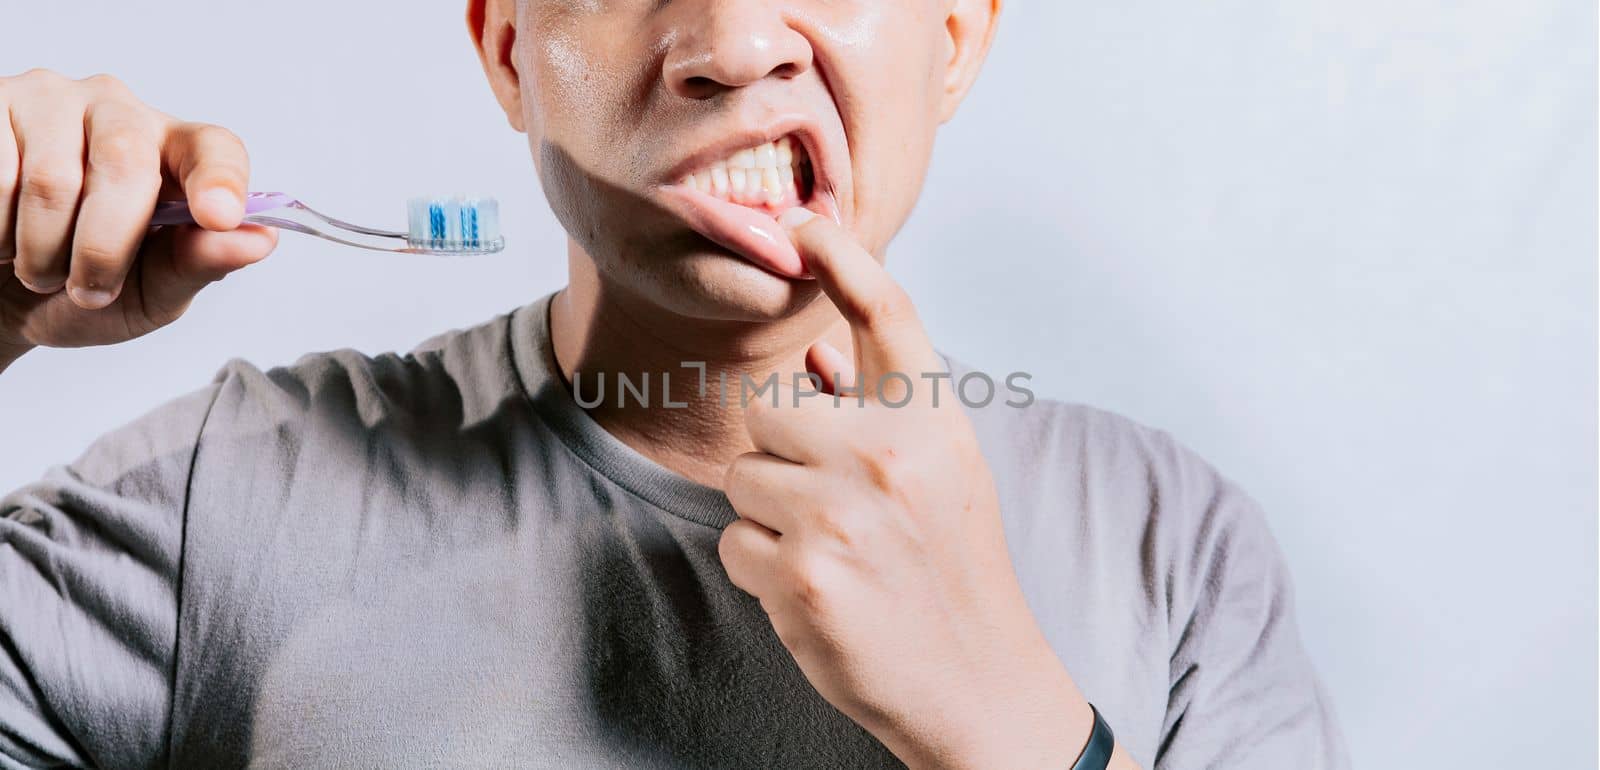 Person with gingivitis holding toothbrush. People holding toothbrush with gum pain. Man holding toothbrush with gum pain, People holding toothbrush with gum problem isolated by isaiphoto